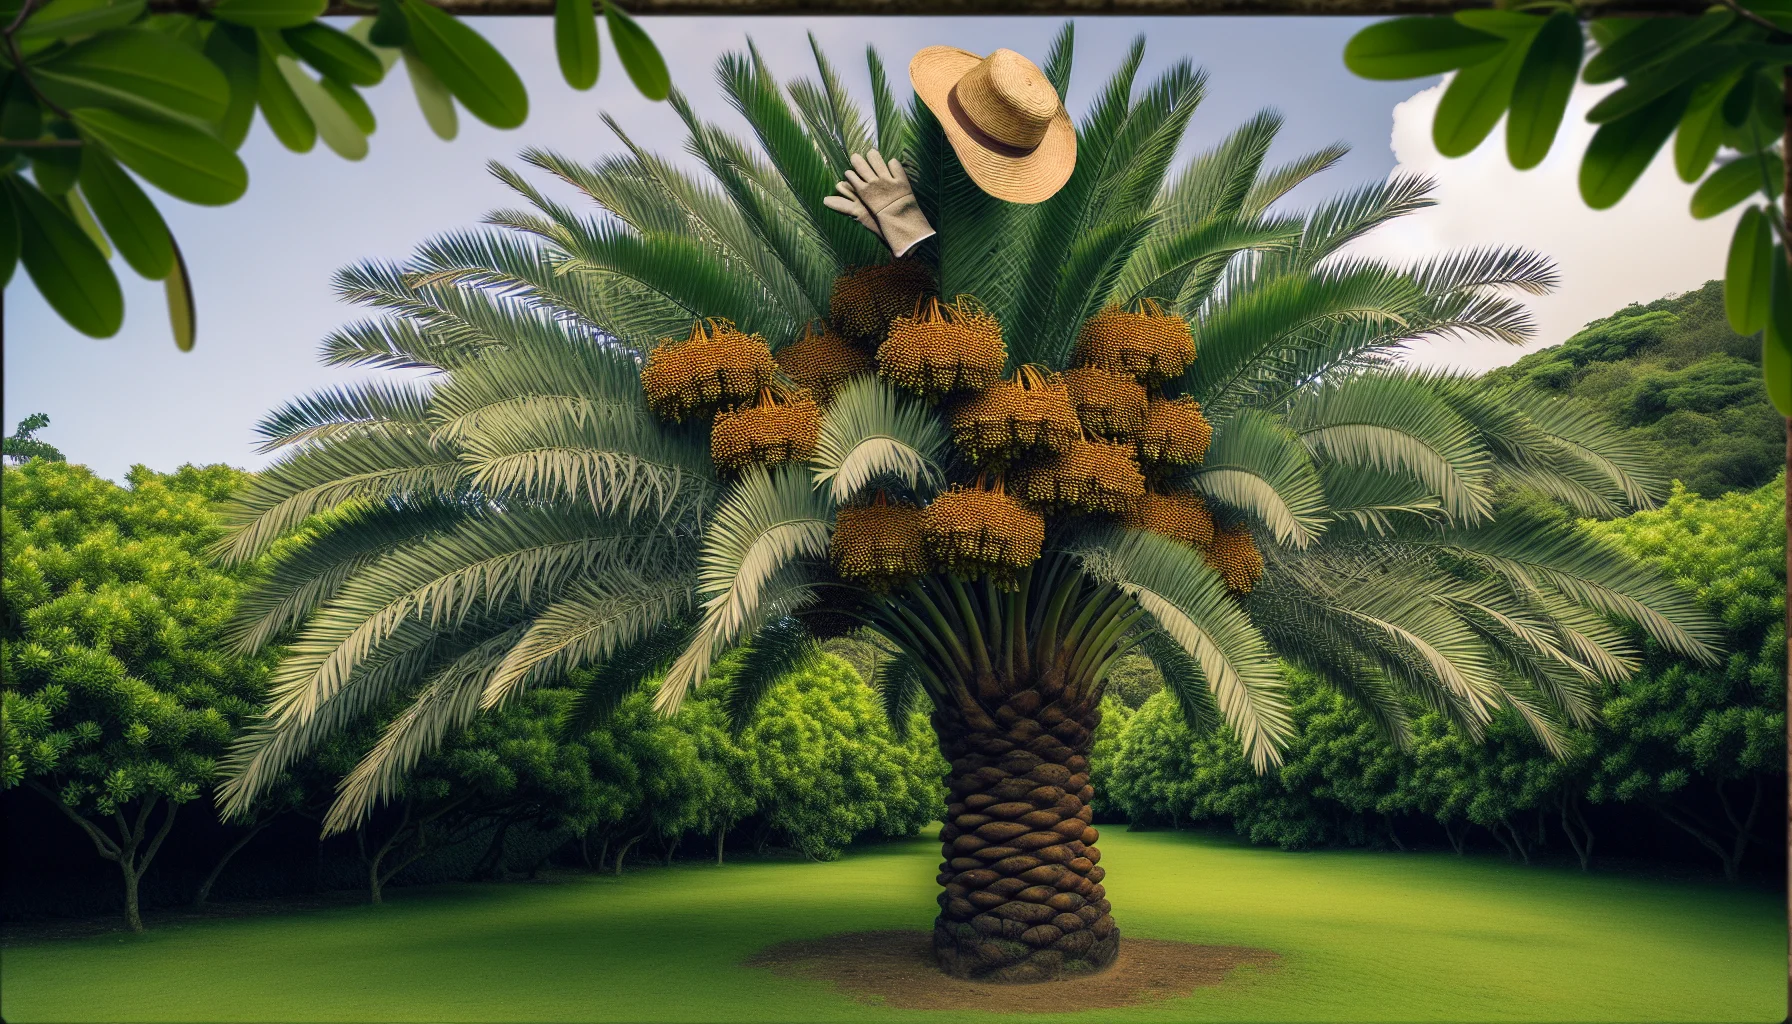 Imagine a whimsical scene centered around a tall, robust date palm tree. It's situated in a lush, verdant garden. Its lush green fronds are rustling in the breeze, and its branches are laden with clusters of golden dates. Picture the curious sight of a pair of garden gloves and a straw hat perched humorously atop the uppermost leaves, as if the tree is trying to imitate a gardener. The tree stands tall and proud, encouraging passersby with its playful demeanor, suggesting that anyone can enjoy the rewarding and lighthearted aspects of gardening.